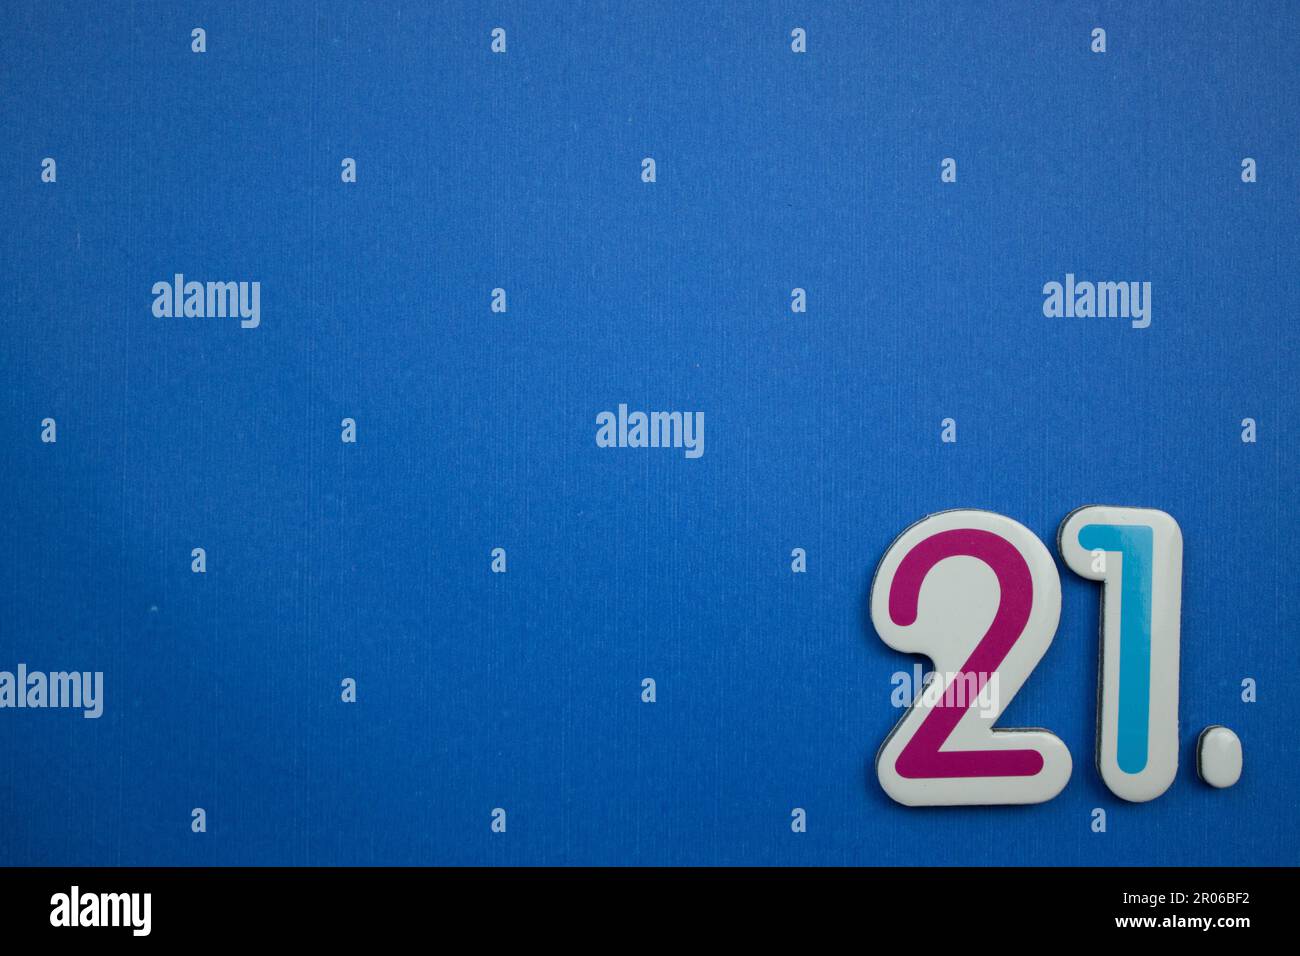 The number 21, placed on the edge of a blue background, photographed from above, colored red and light blue. Stock Photo